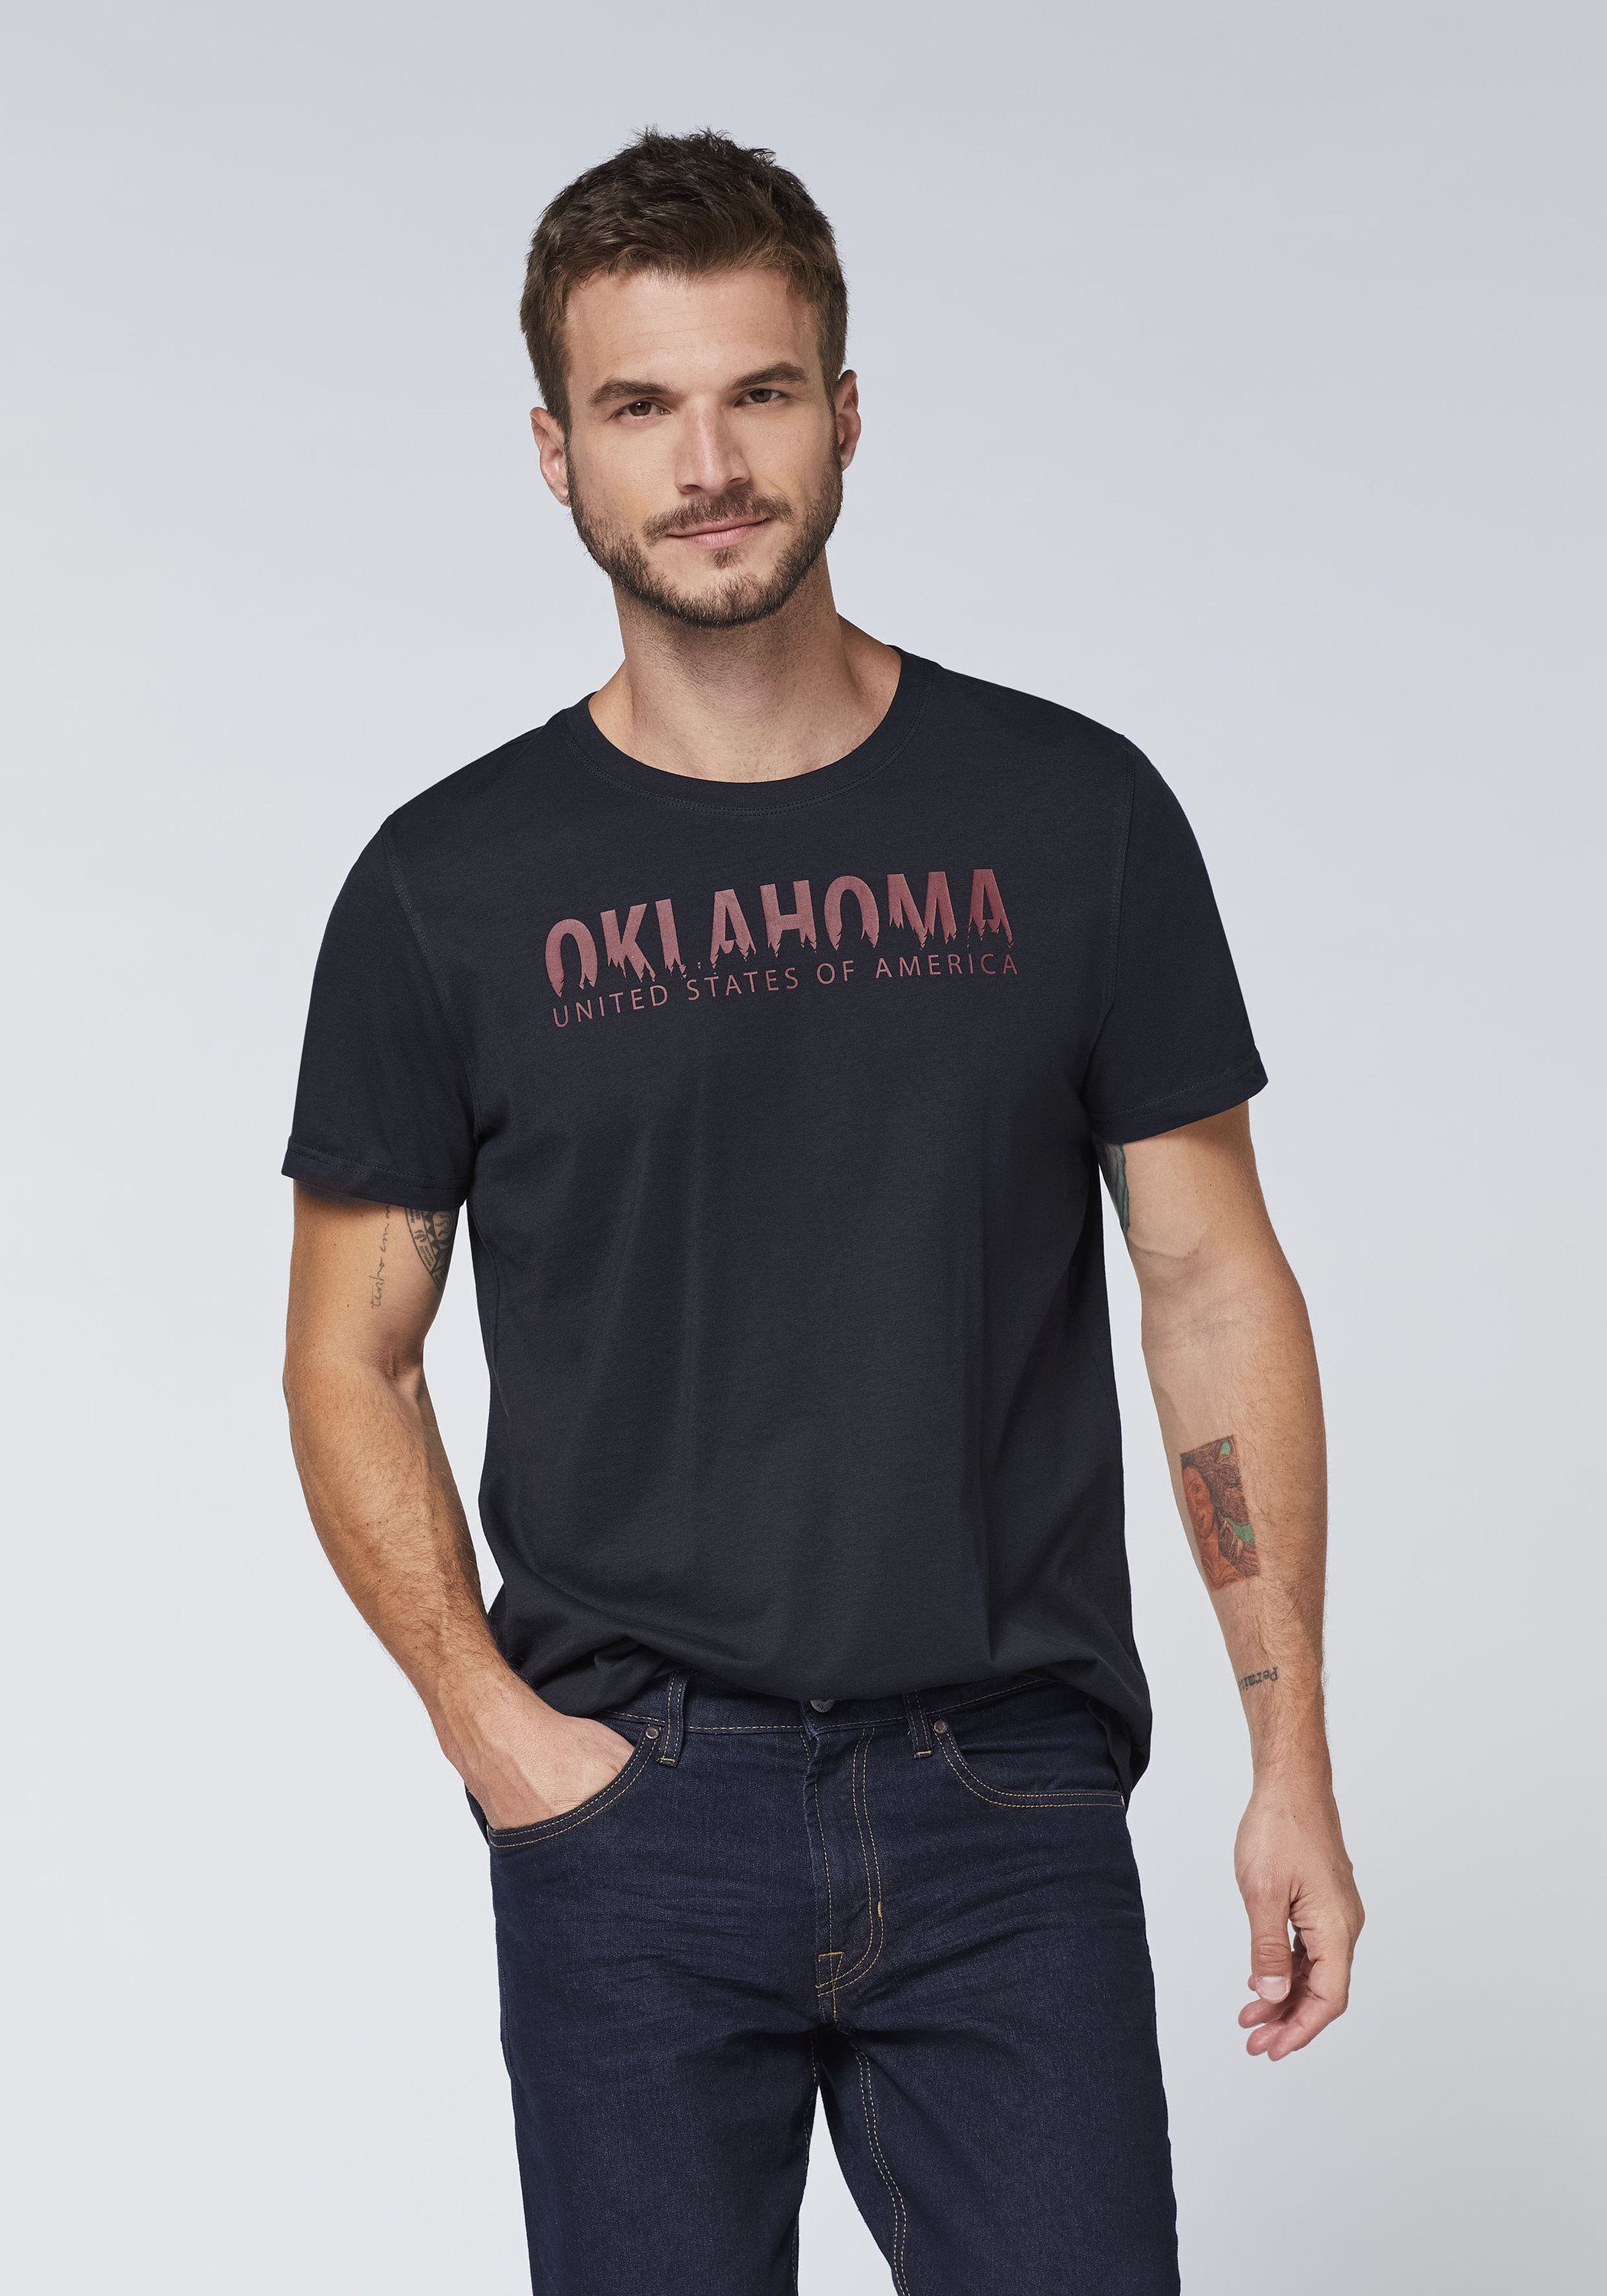 Jeans im Nature-Label-Look Print-Shirt Oklahoma Eclipse 19-4010 Total